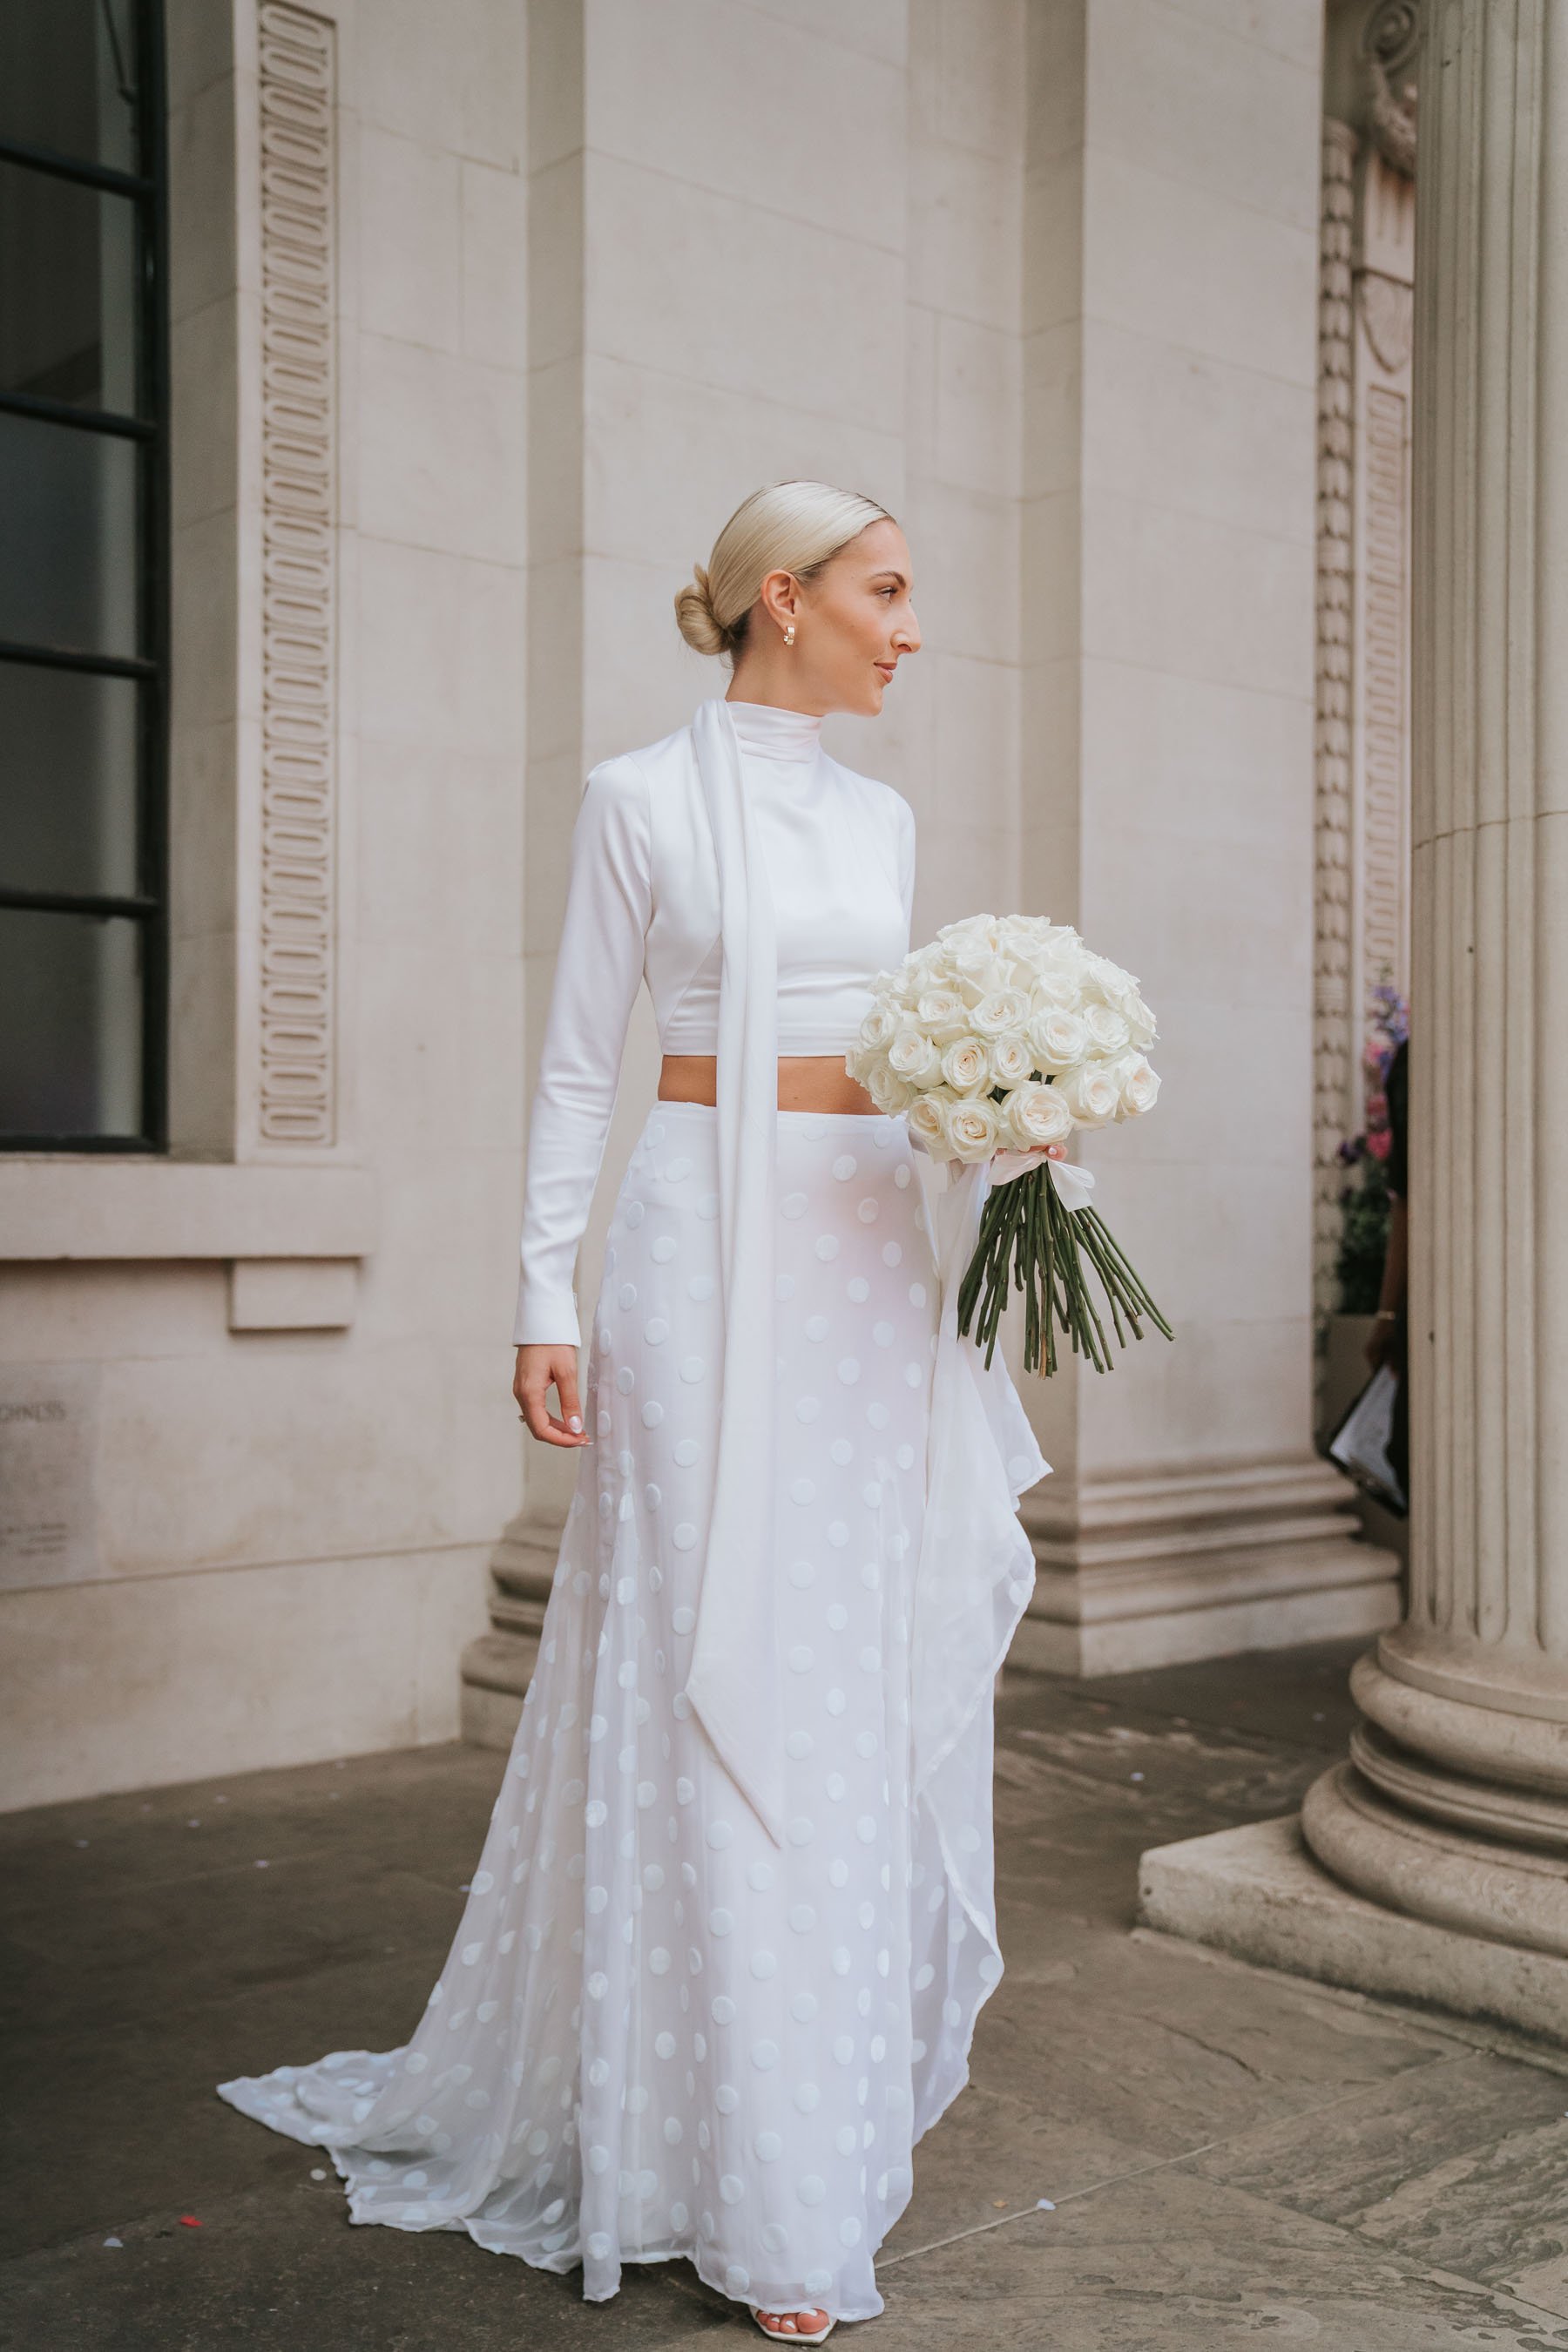  Bride Abbie poses for a photograph holding her bouquet of flowers between the columns outside the old marylebone town hall. 